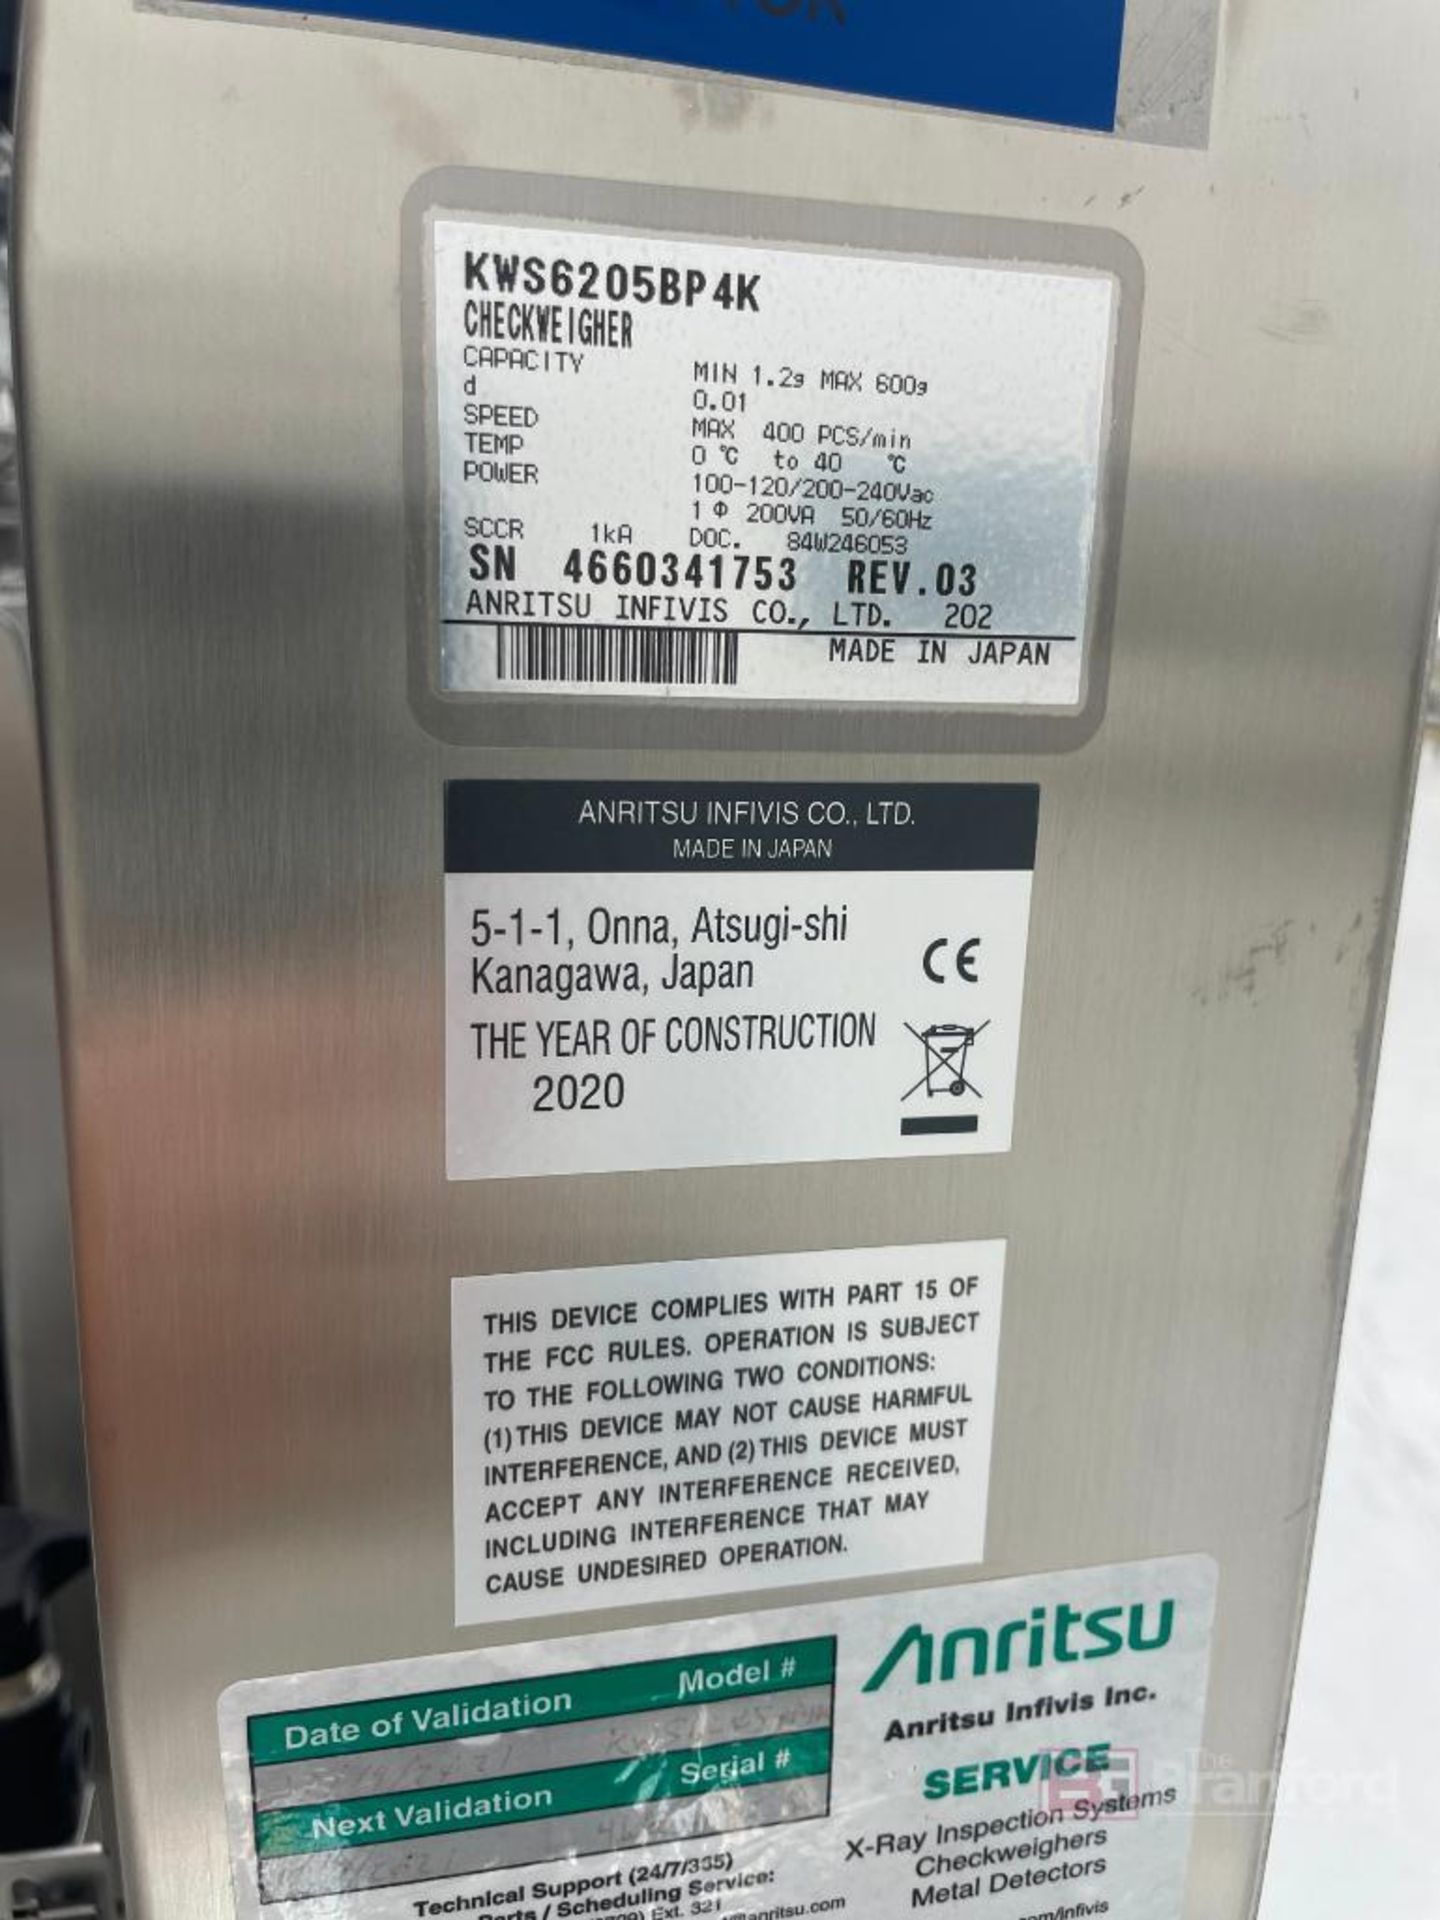 Anritsu SSV Series Checkweigher/Metal Detector and Rejector - Image 5 of 7